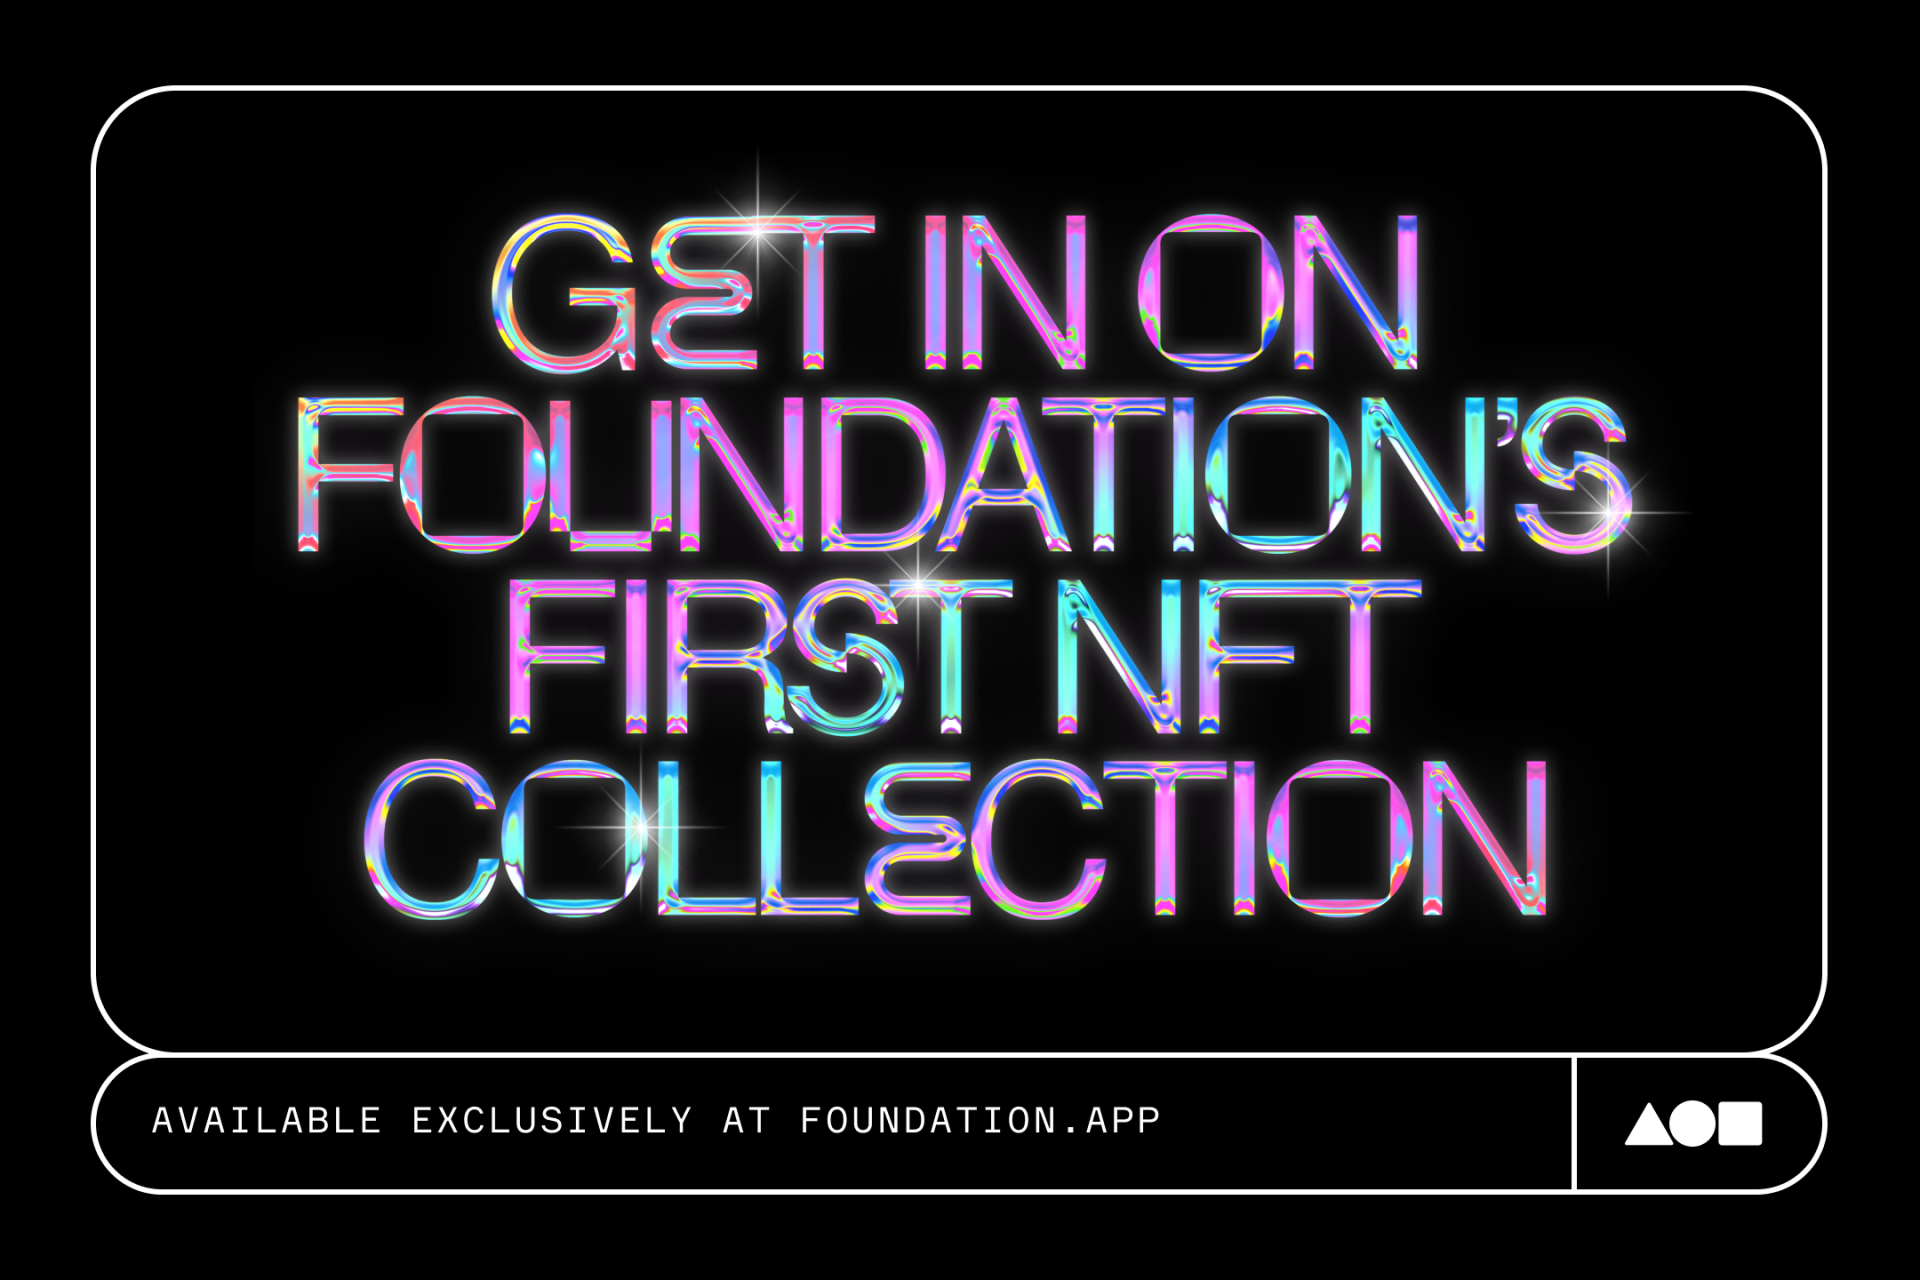 Get in on Foundation’s first NFT collection.